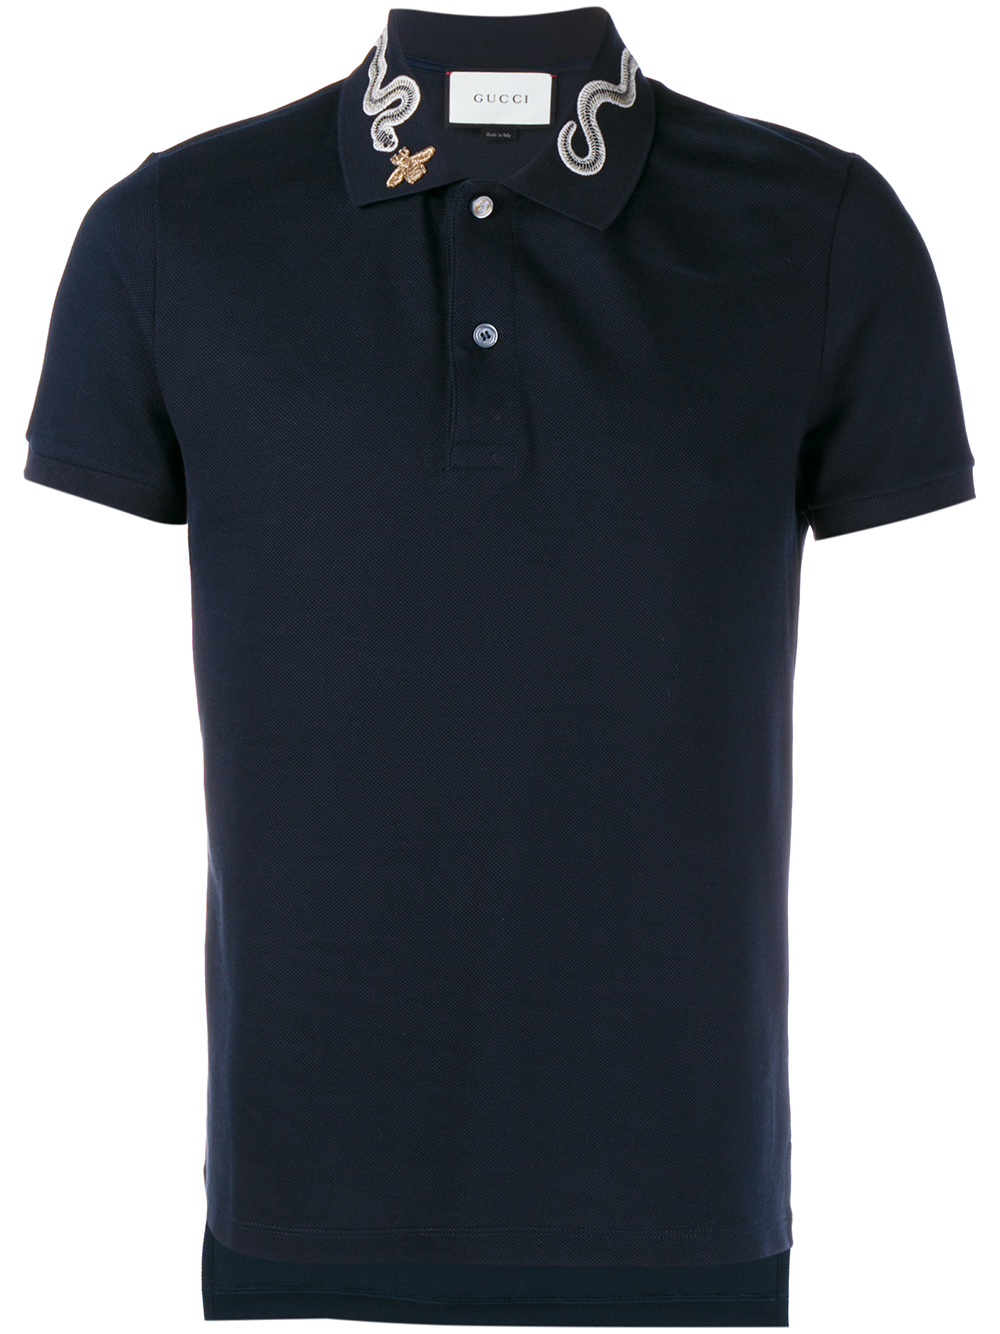 Gucci Snake And Bee Collar Polo Shirt in Blue for Men - Lyst